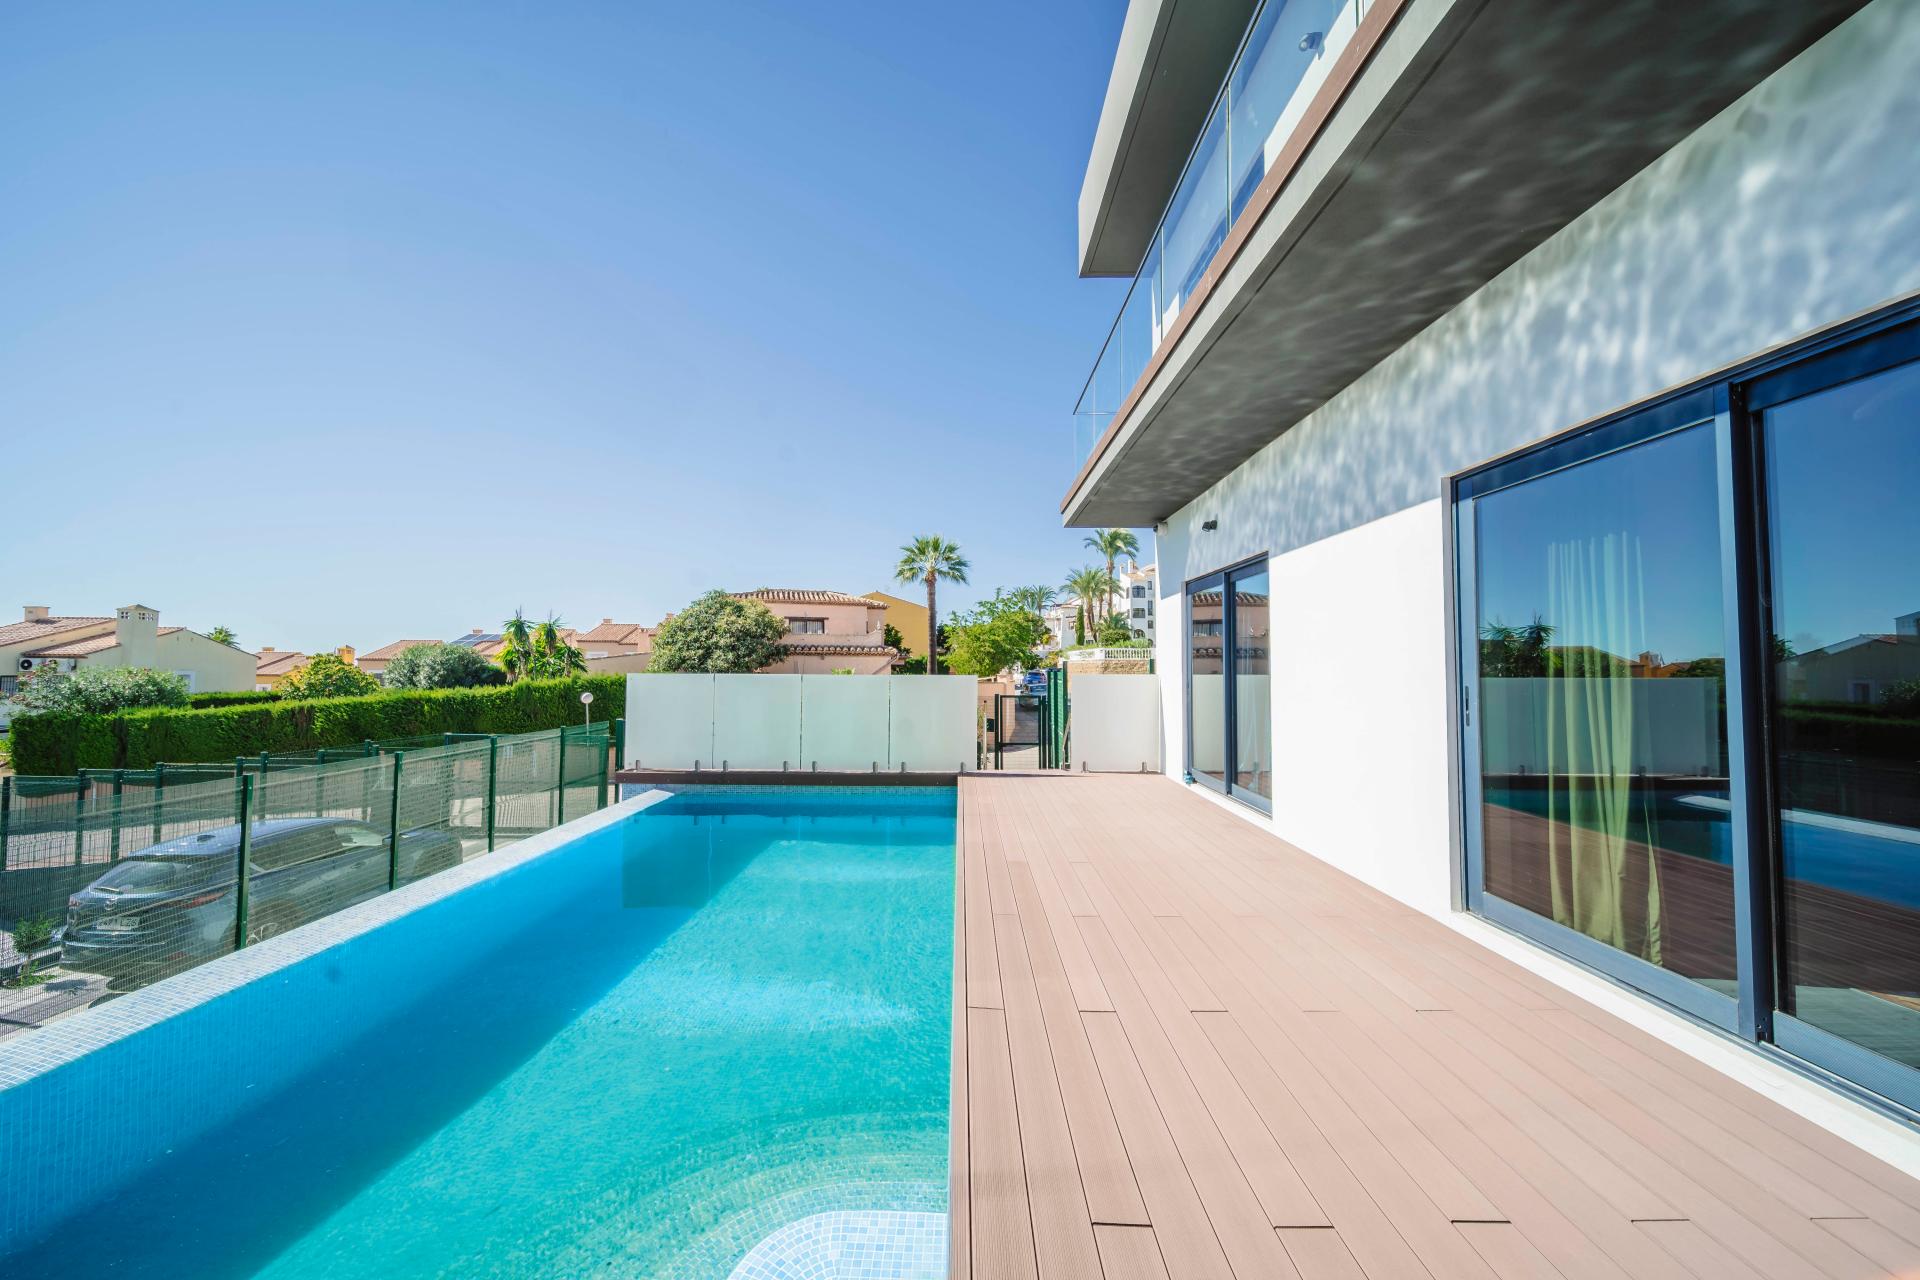 Contemporary new, five bedroom villa in a sought after location of Calahonda, Mijas Costa - walking distance to the beach